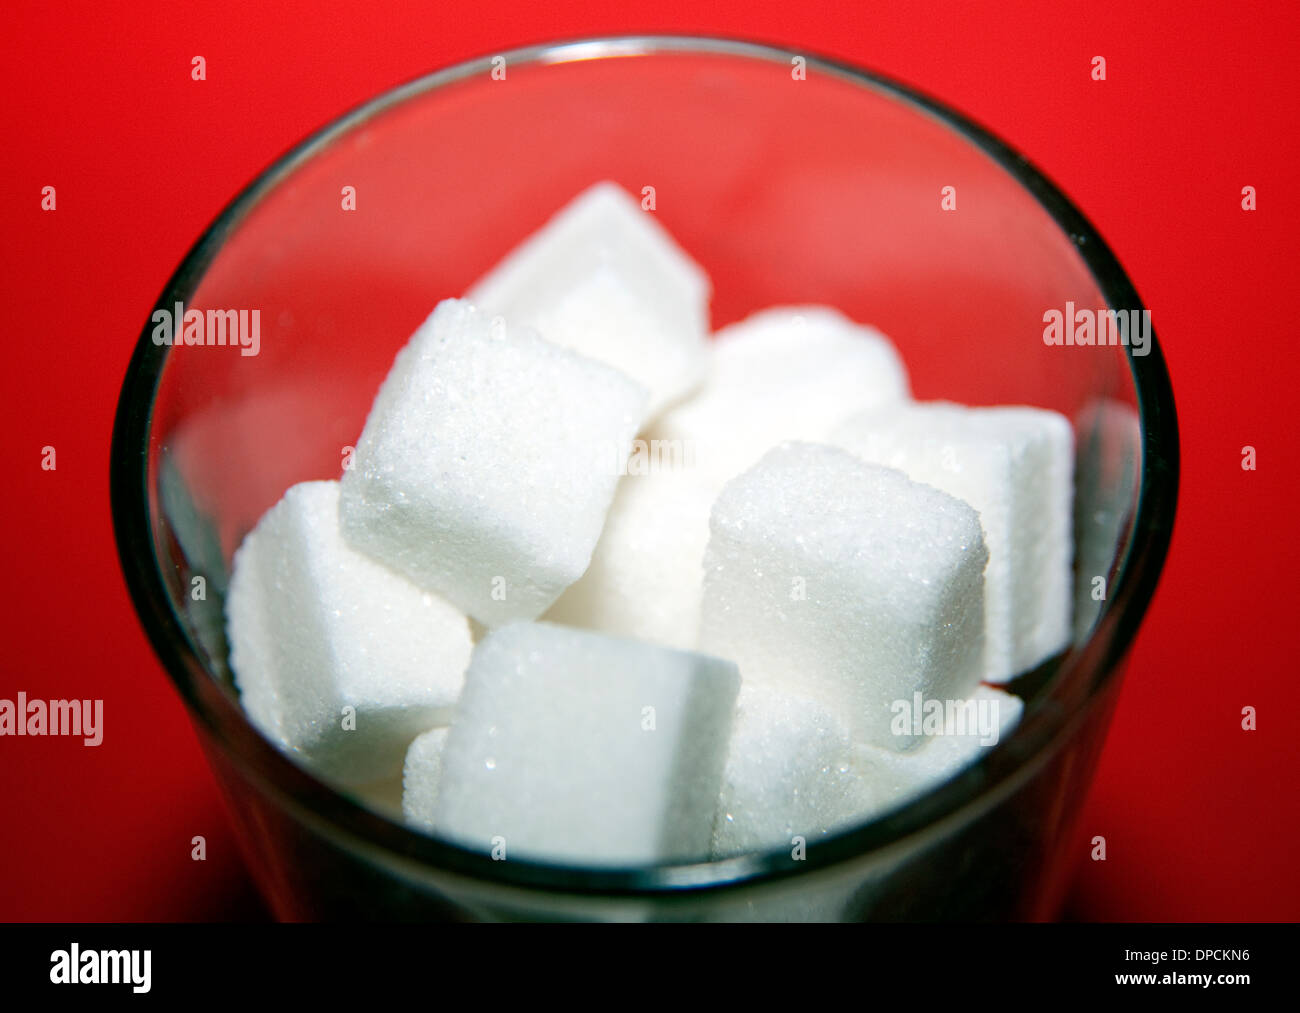 Many fizzy drinks contain a large amount of sugar, London Stock Photo